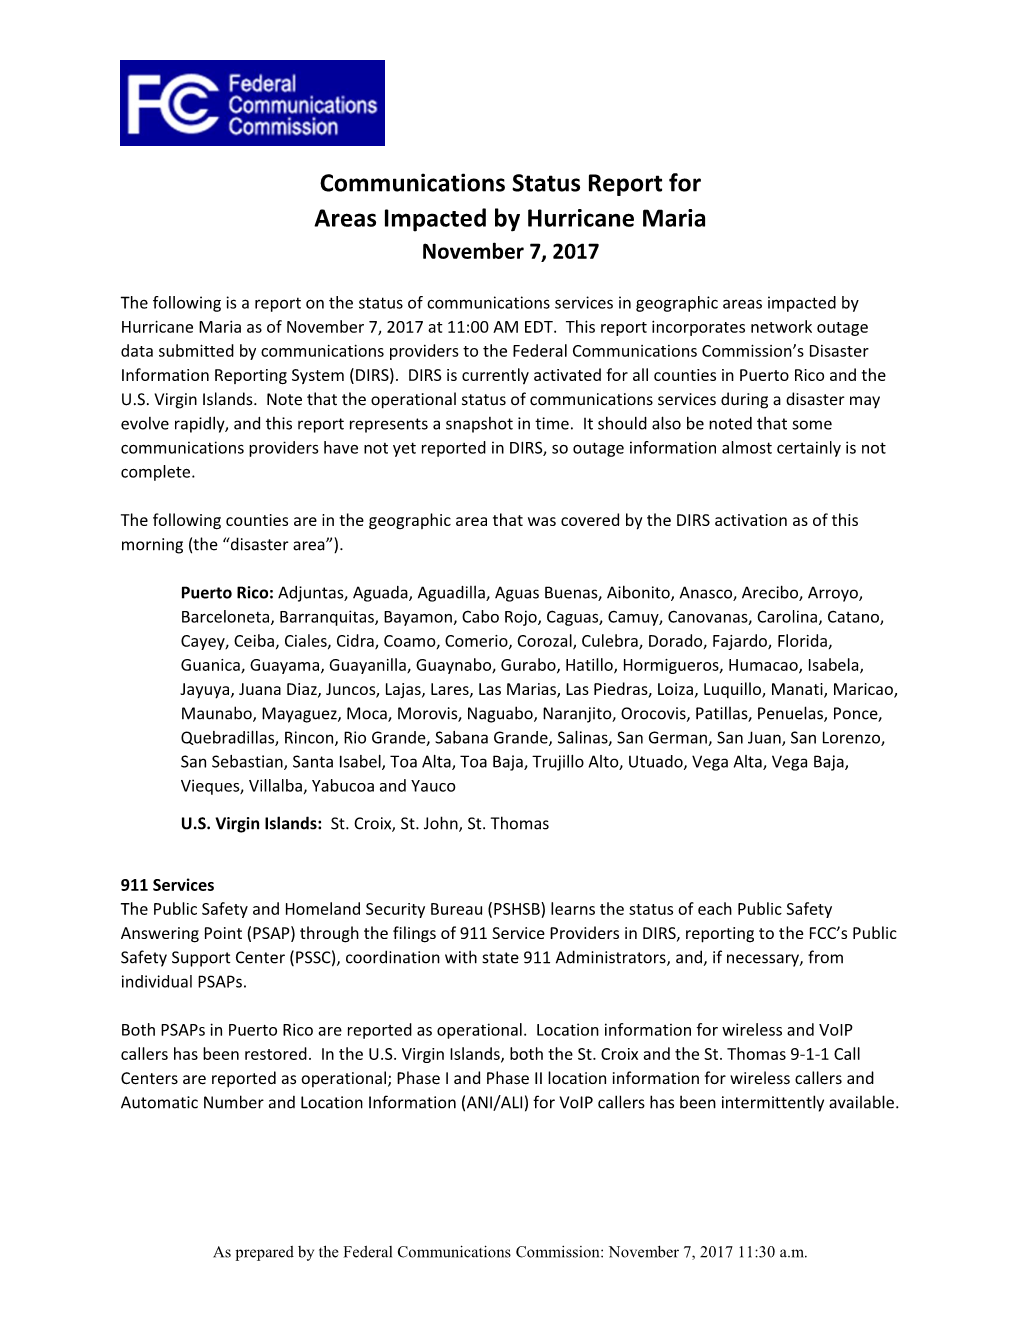 Communications Status Report for Areas Impacted by Hurricane Maria November 7, 2017